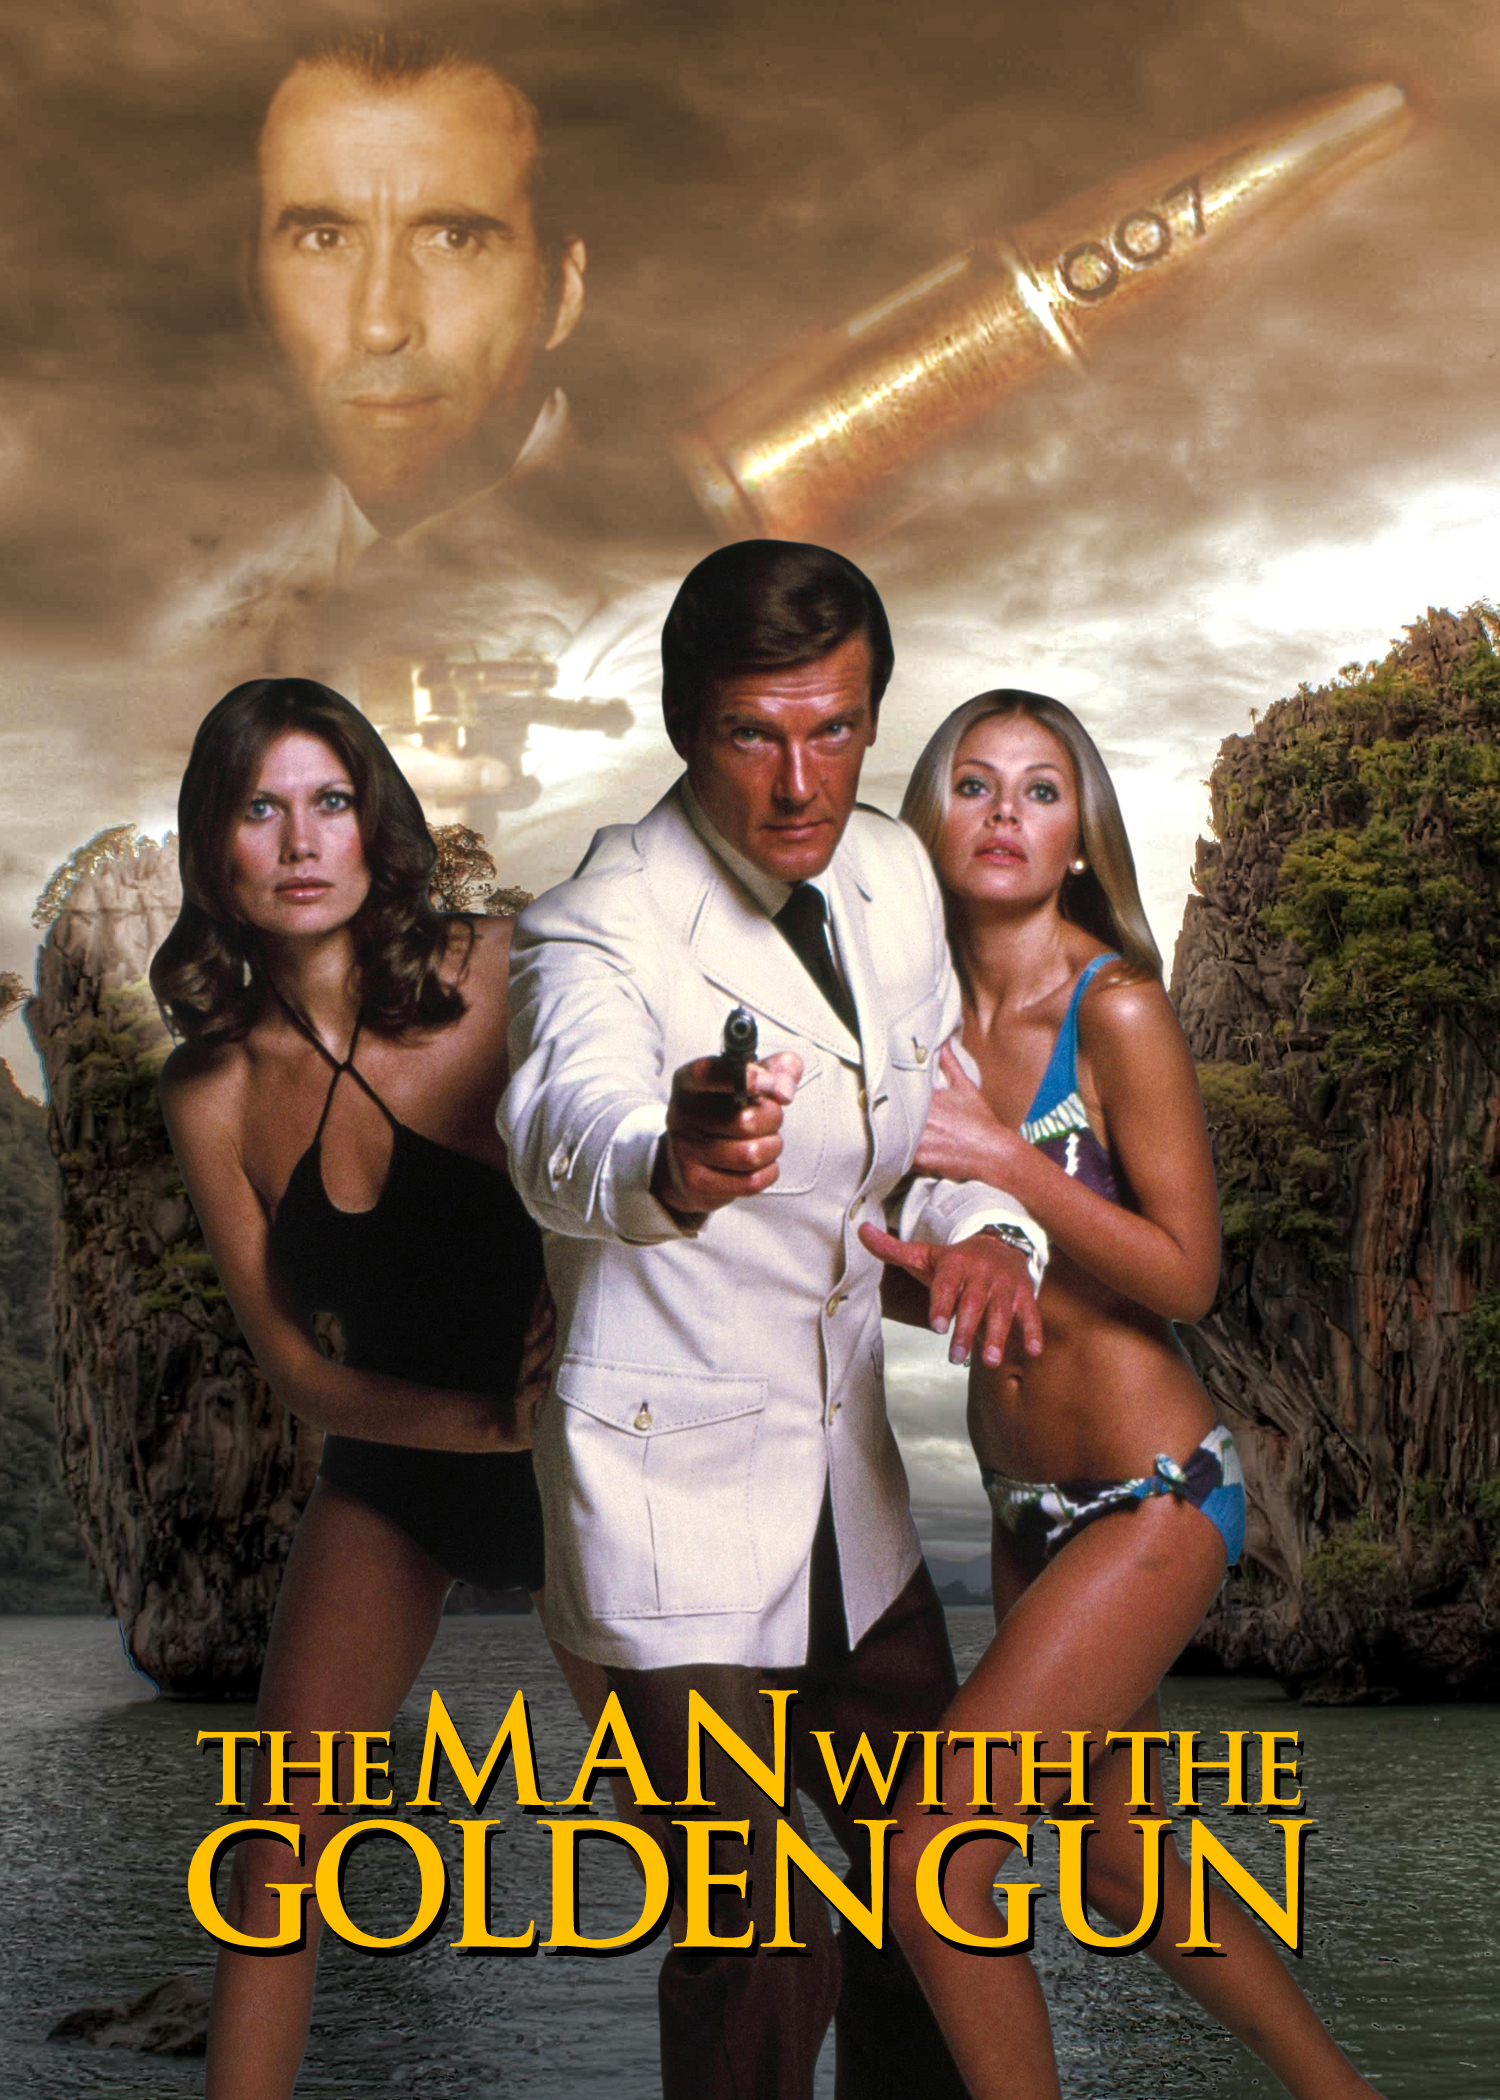 the_man_with_the_golden_gun_poster_by_comandercool22-d67r0gb.jpg